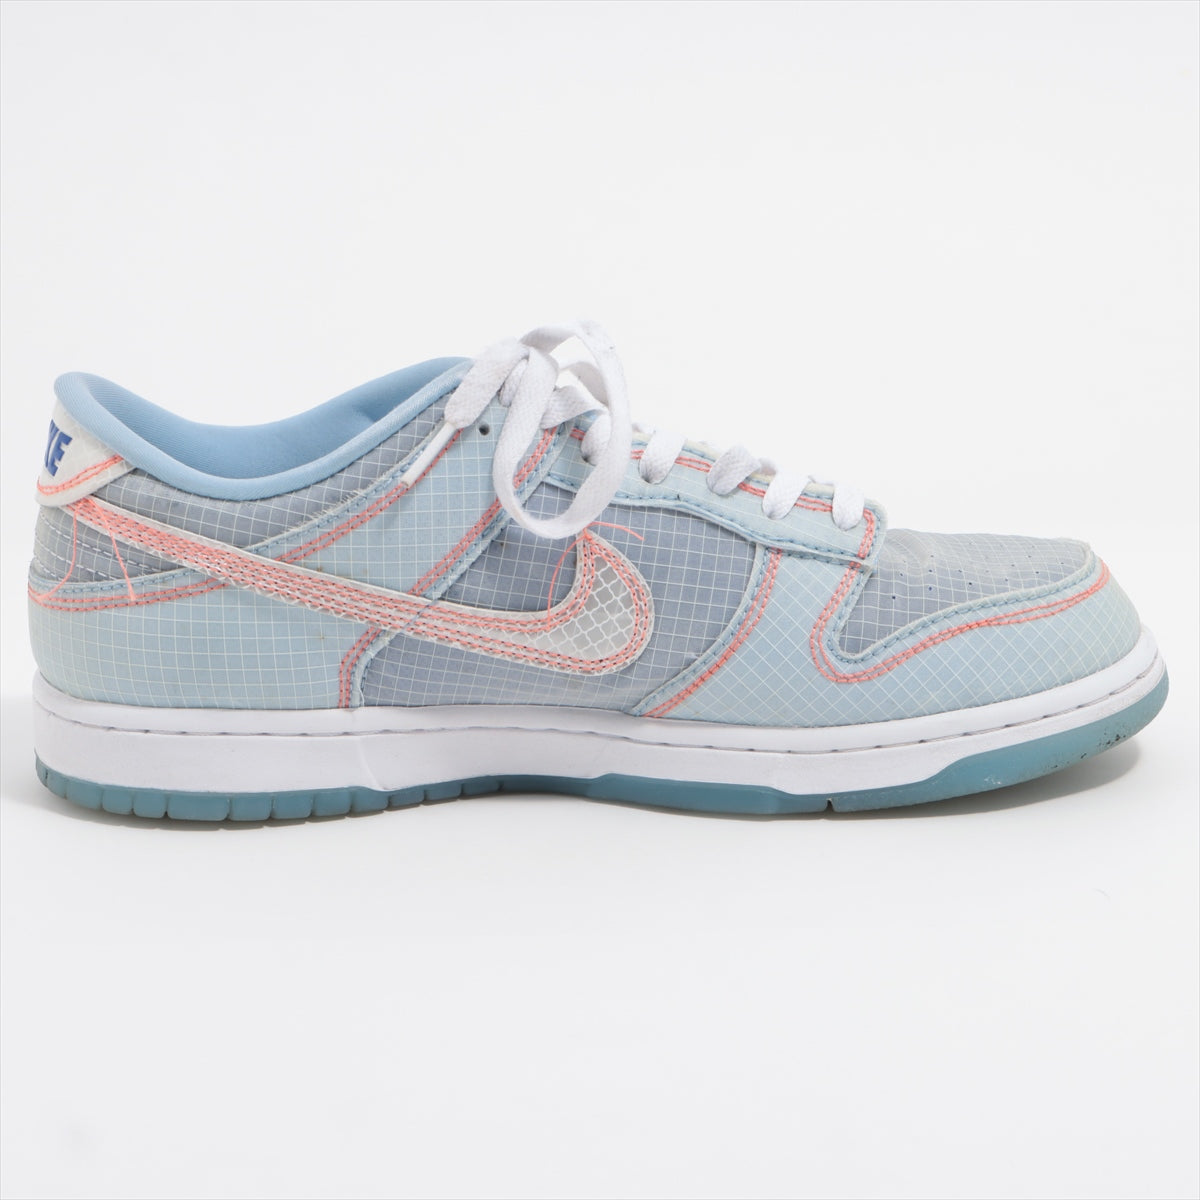 Nike Fabric Sneakers 27cm Men's Blue DJ9649-400 Dunk Low Is there a replacement string